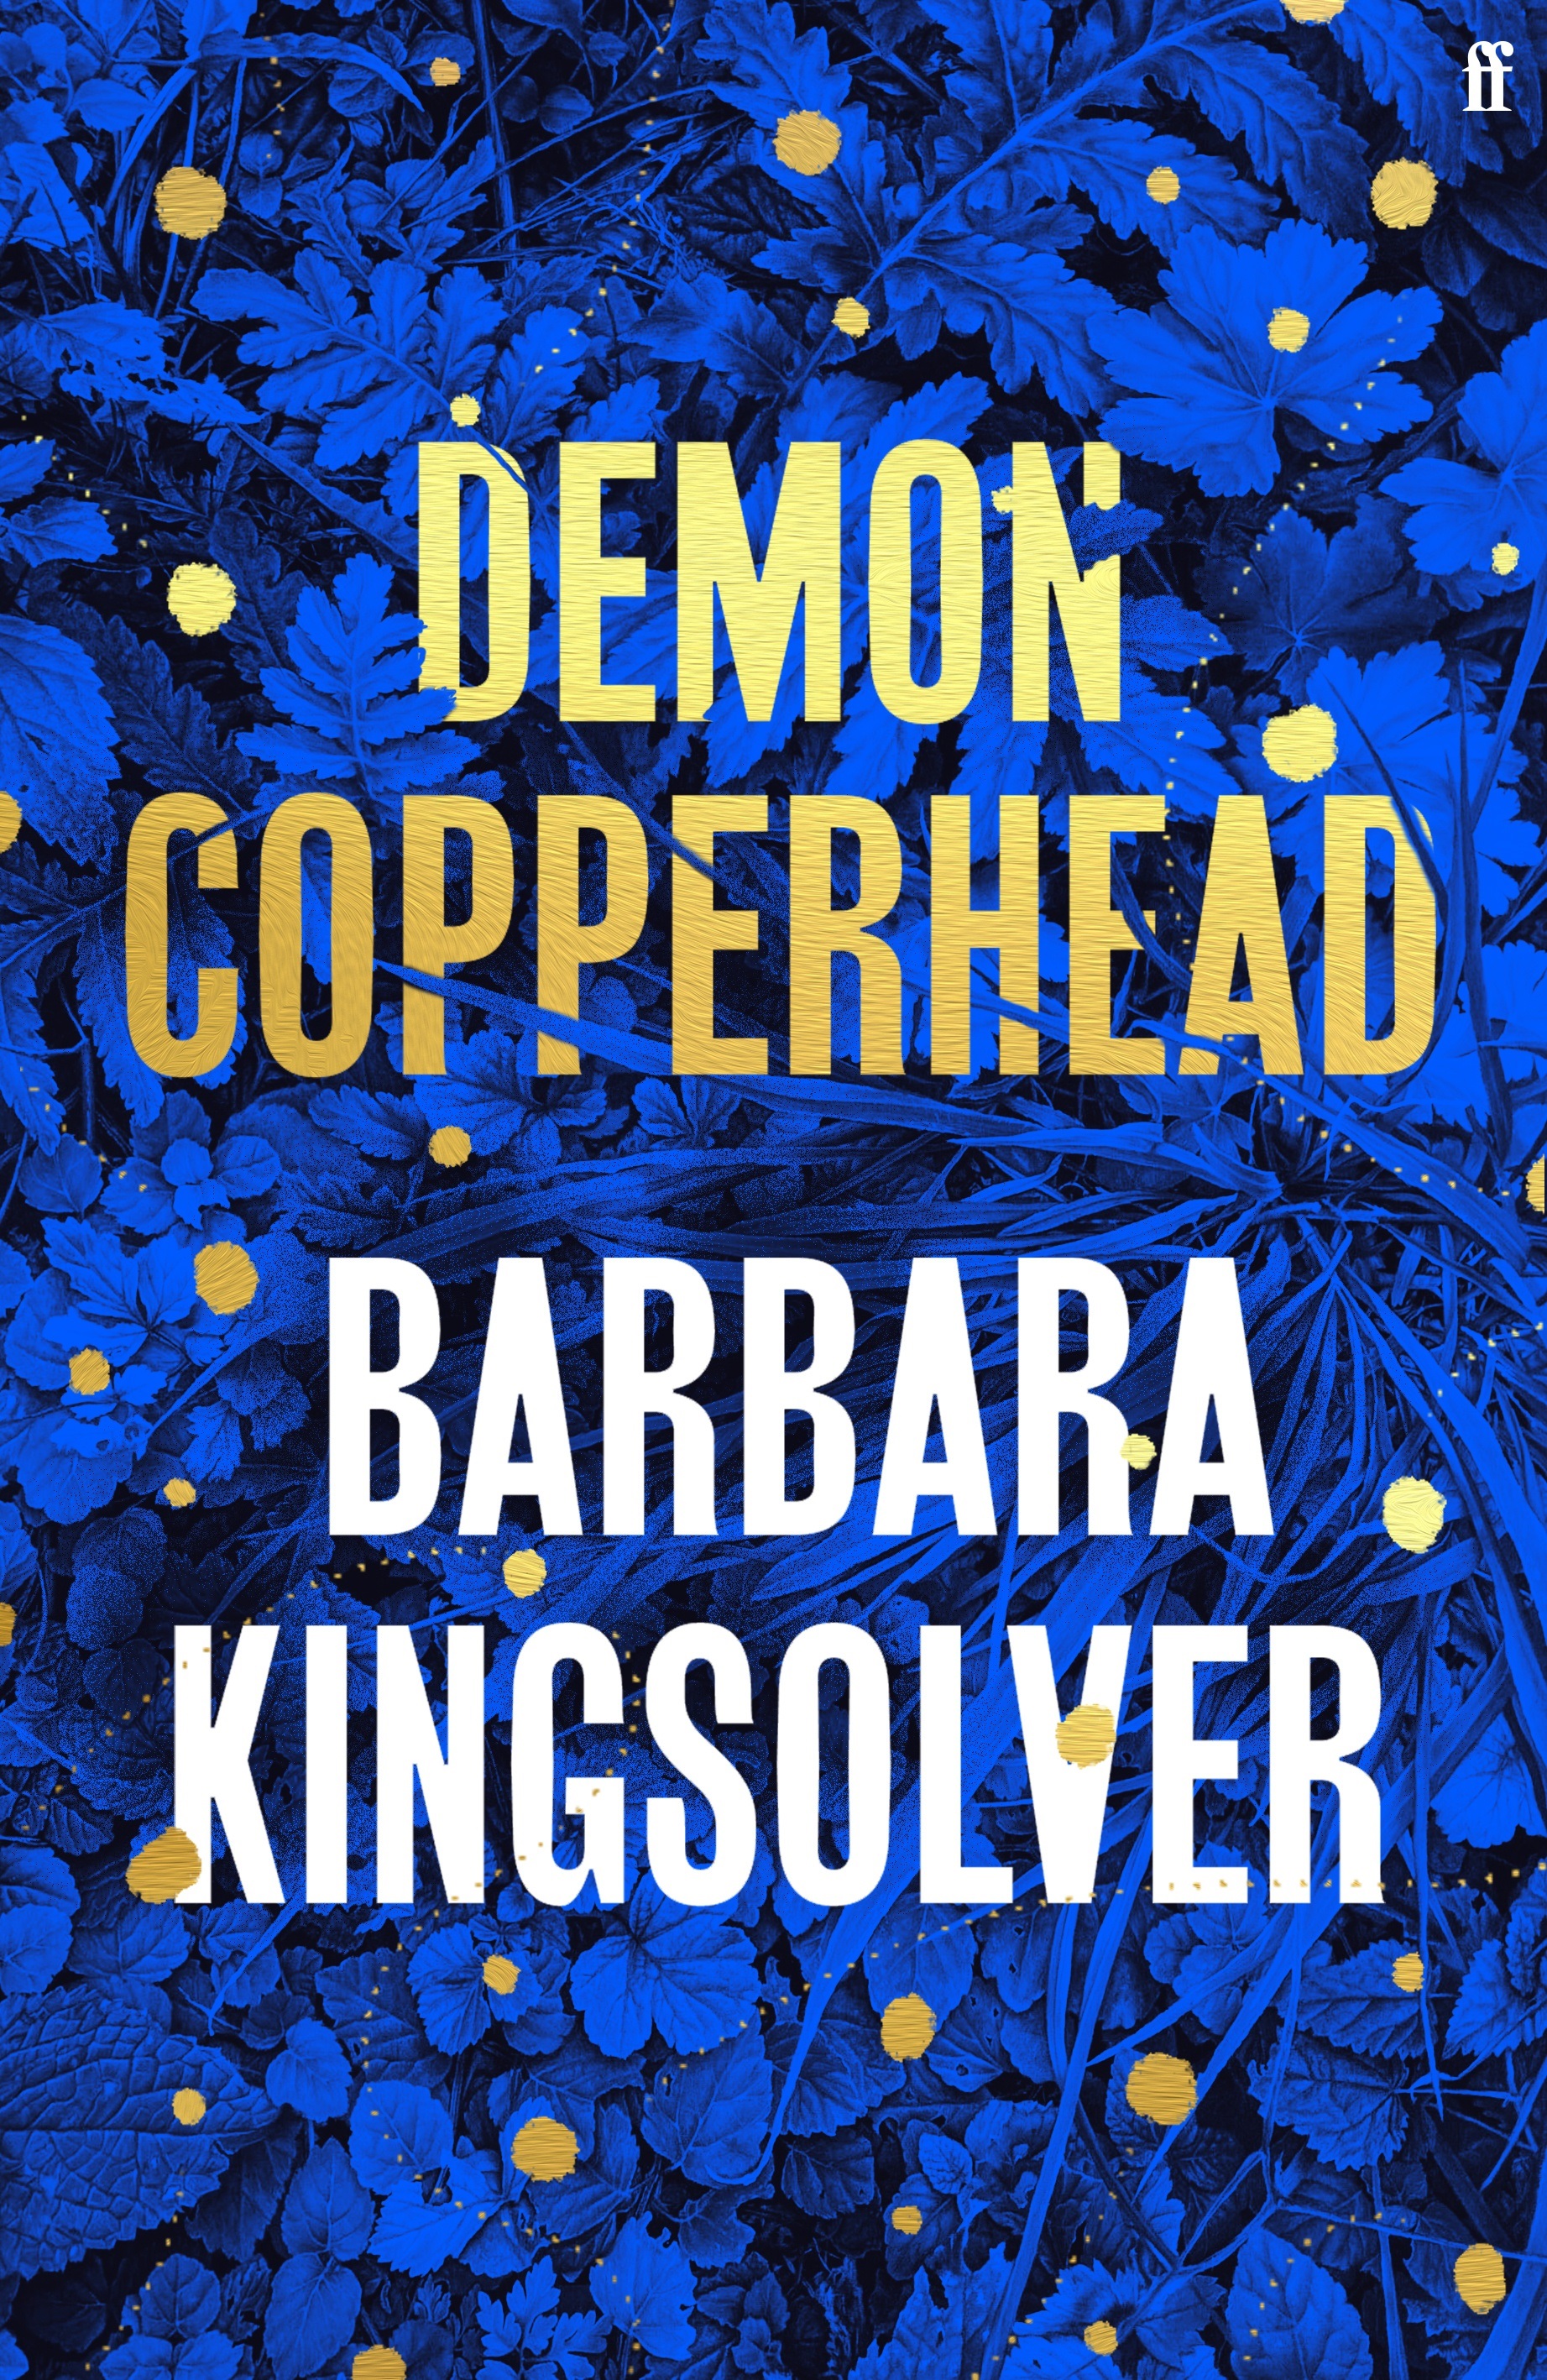 A book cover with text reading Demon Copperhead by Barbara Kingsolver on a blue-lit background of foliage